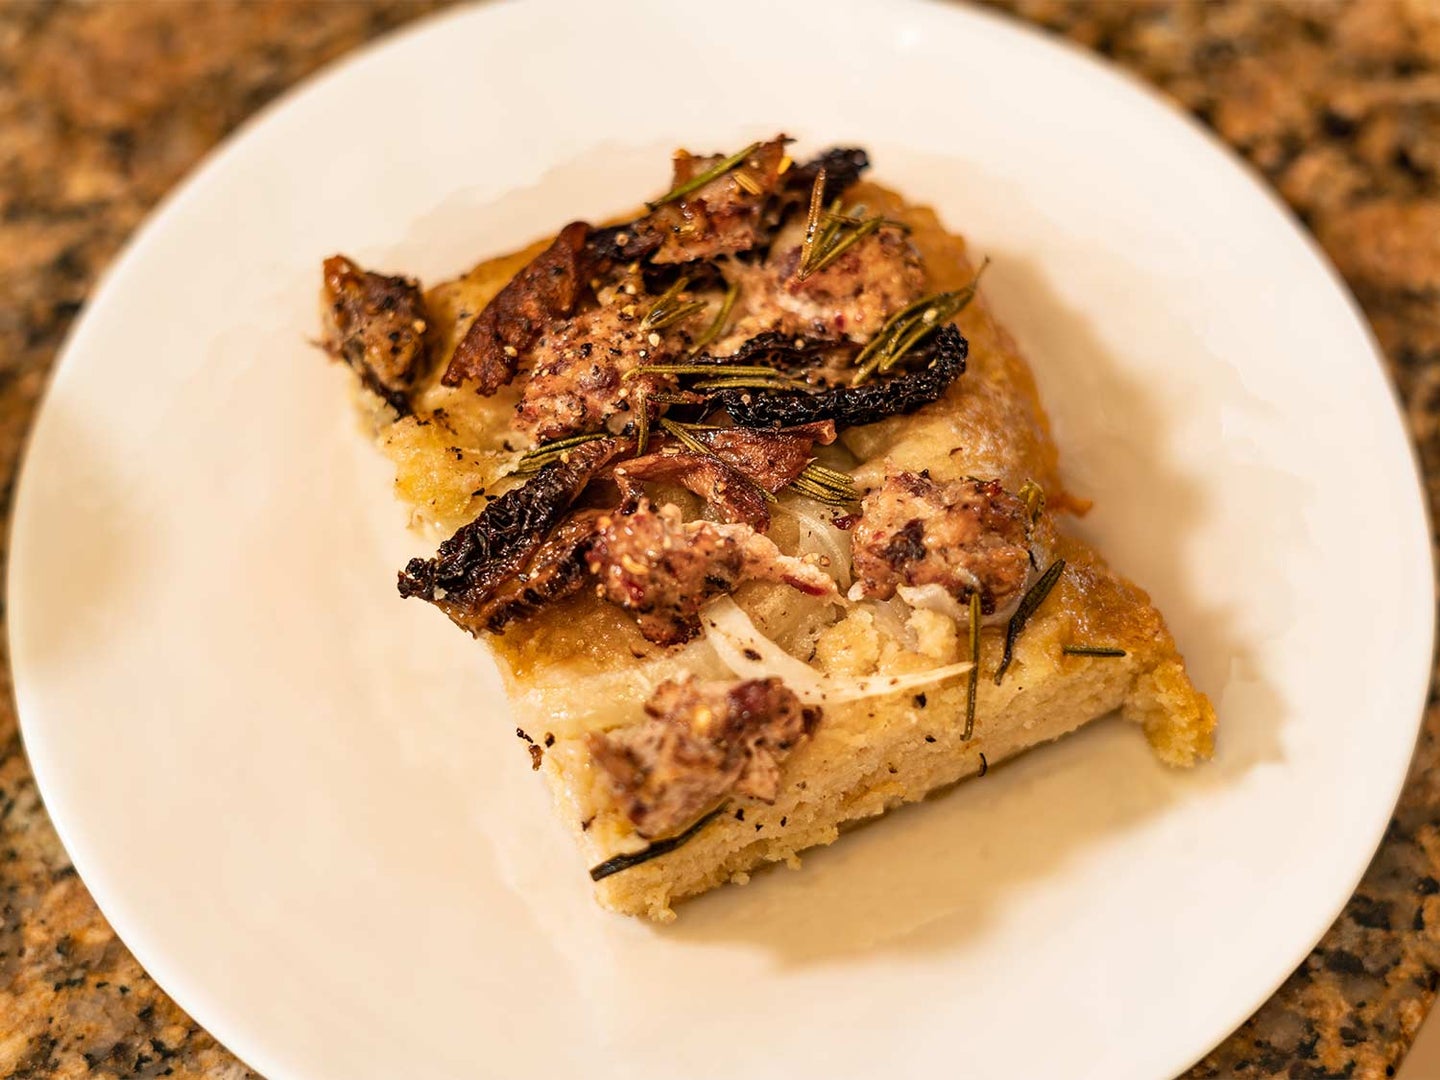 Homemade focaccia topped with morels and wild-turkey sausage.